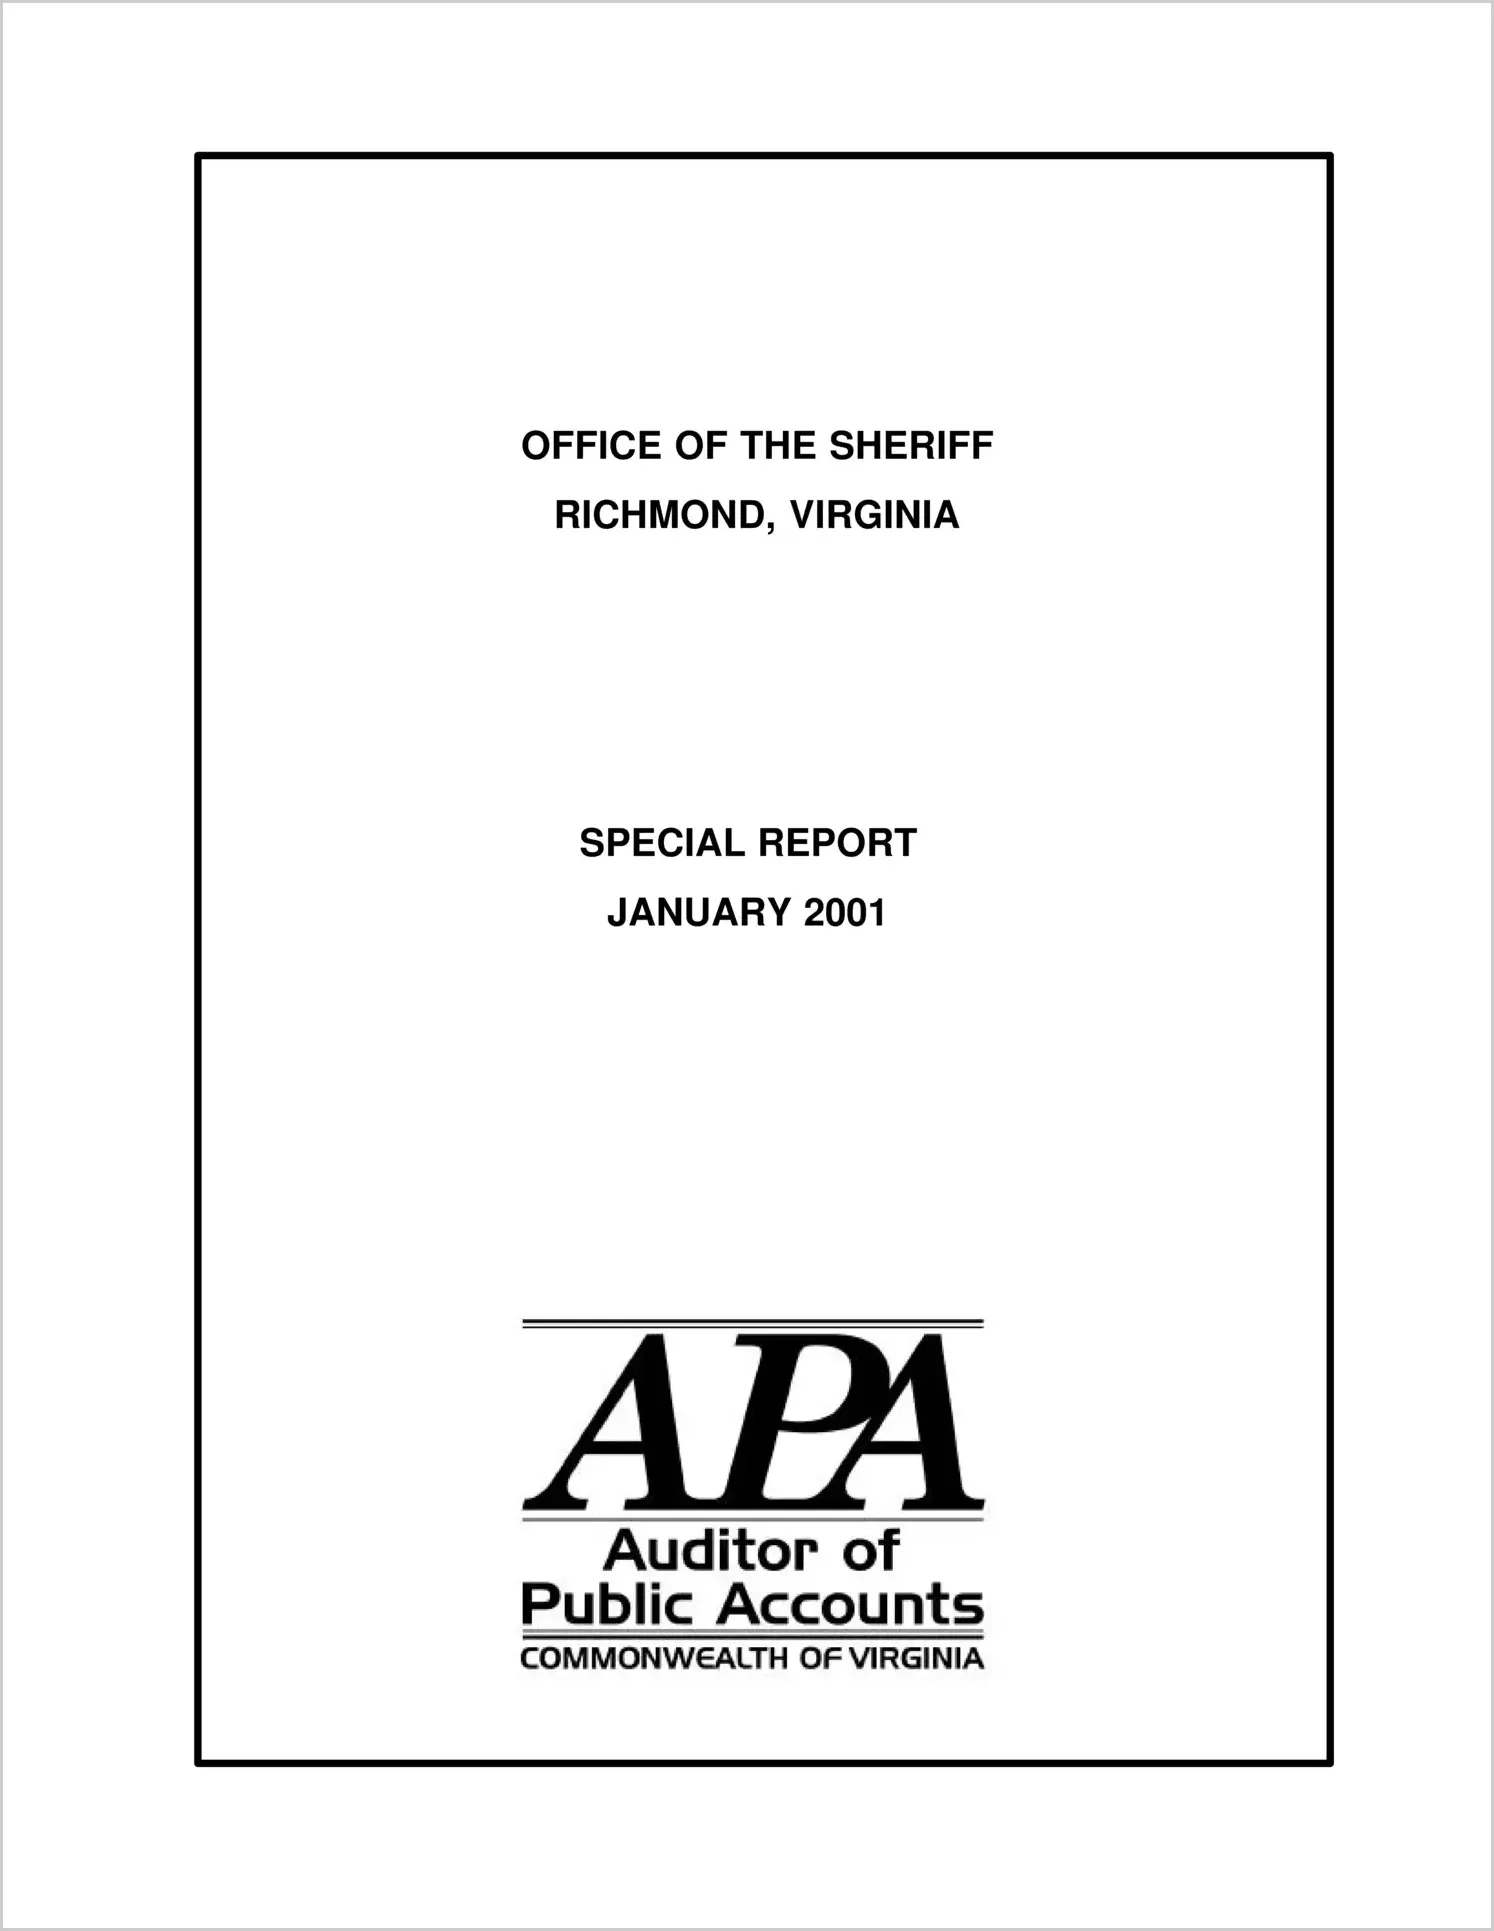 Special ReportOffice of the Sheriff(Report Date: 1/12/2001)